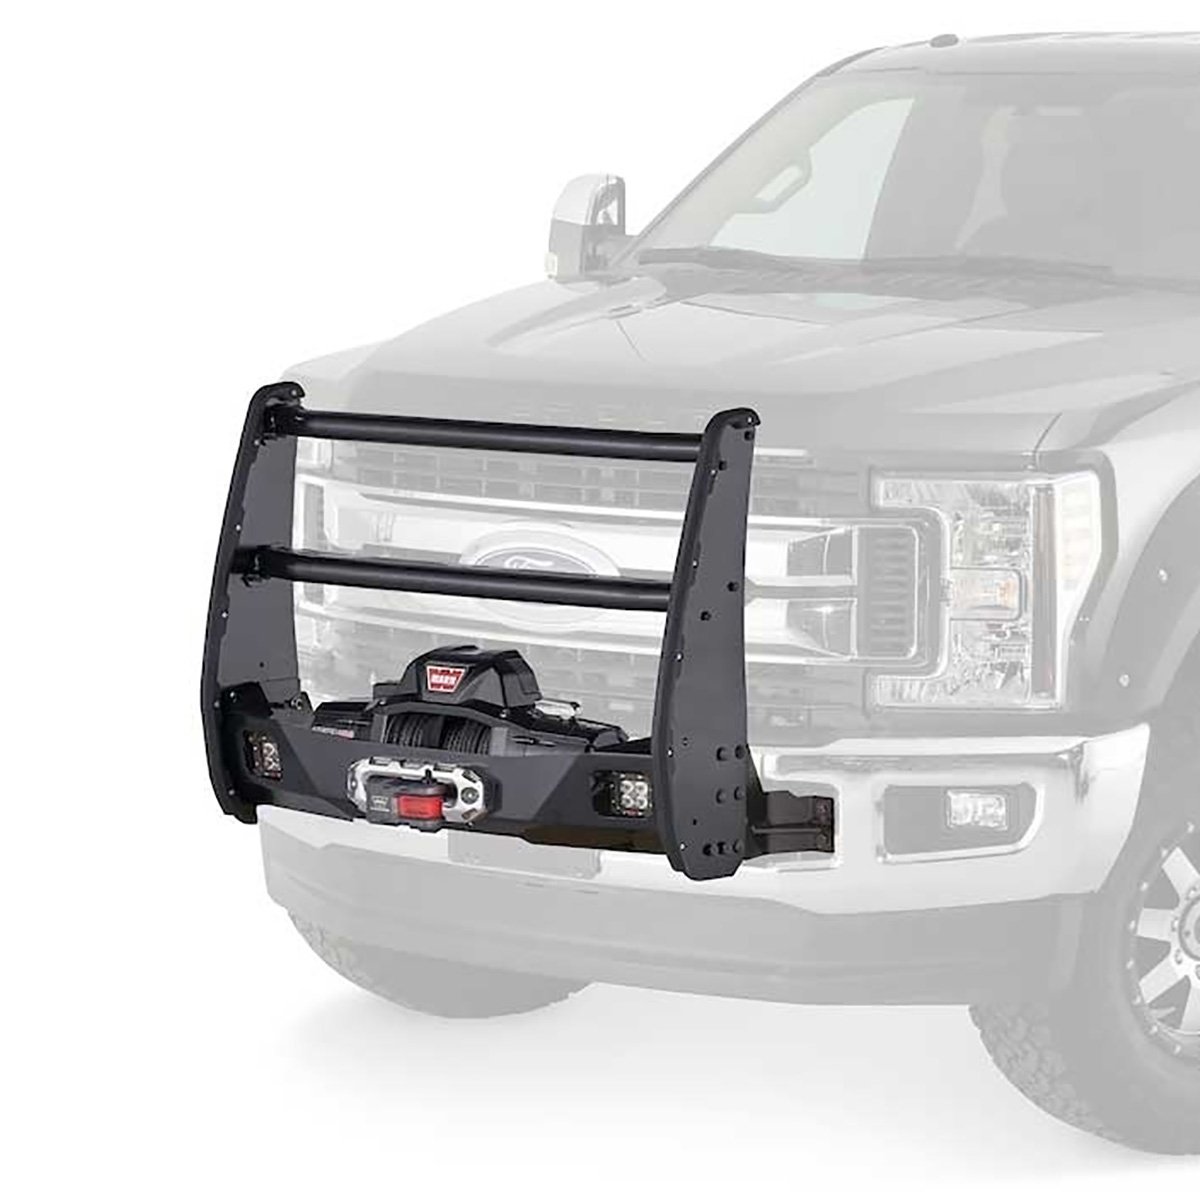 Trans4mer III Center-Only Grille Guard Fits Select Ford F-Series Super Duty and Ranger Pickup Trucks